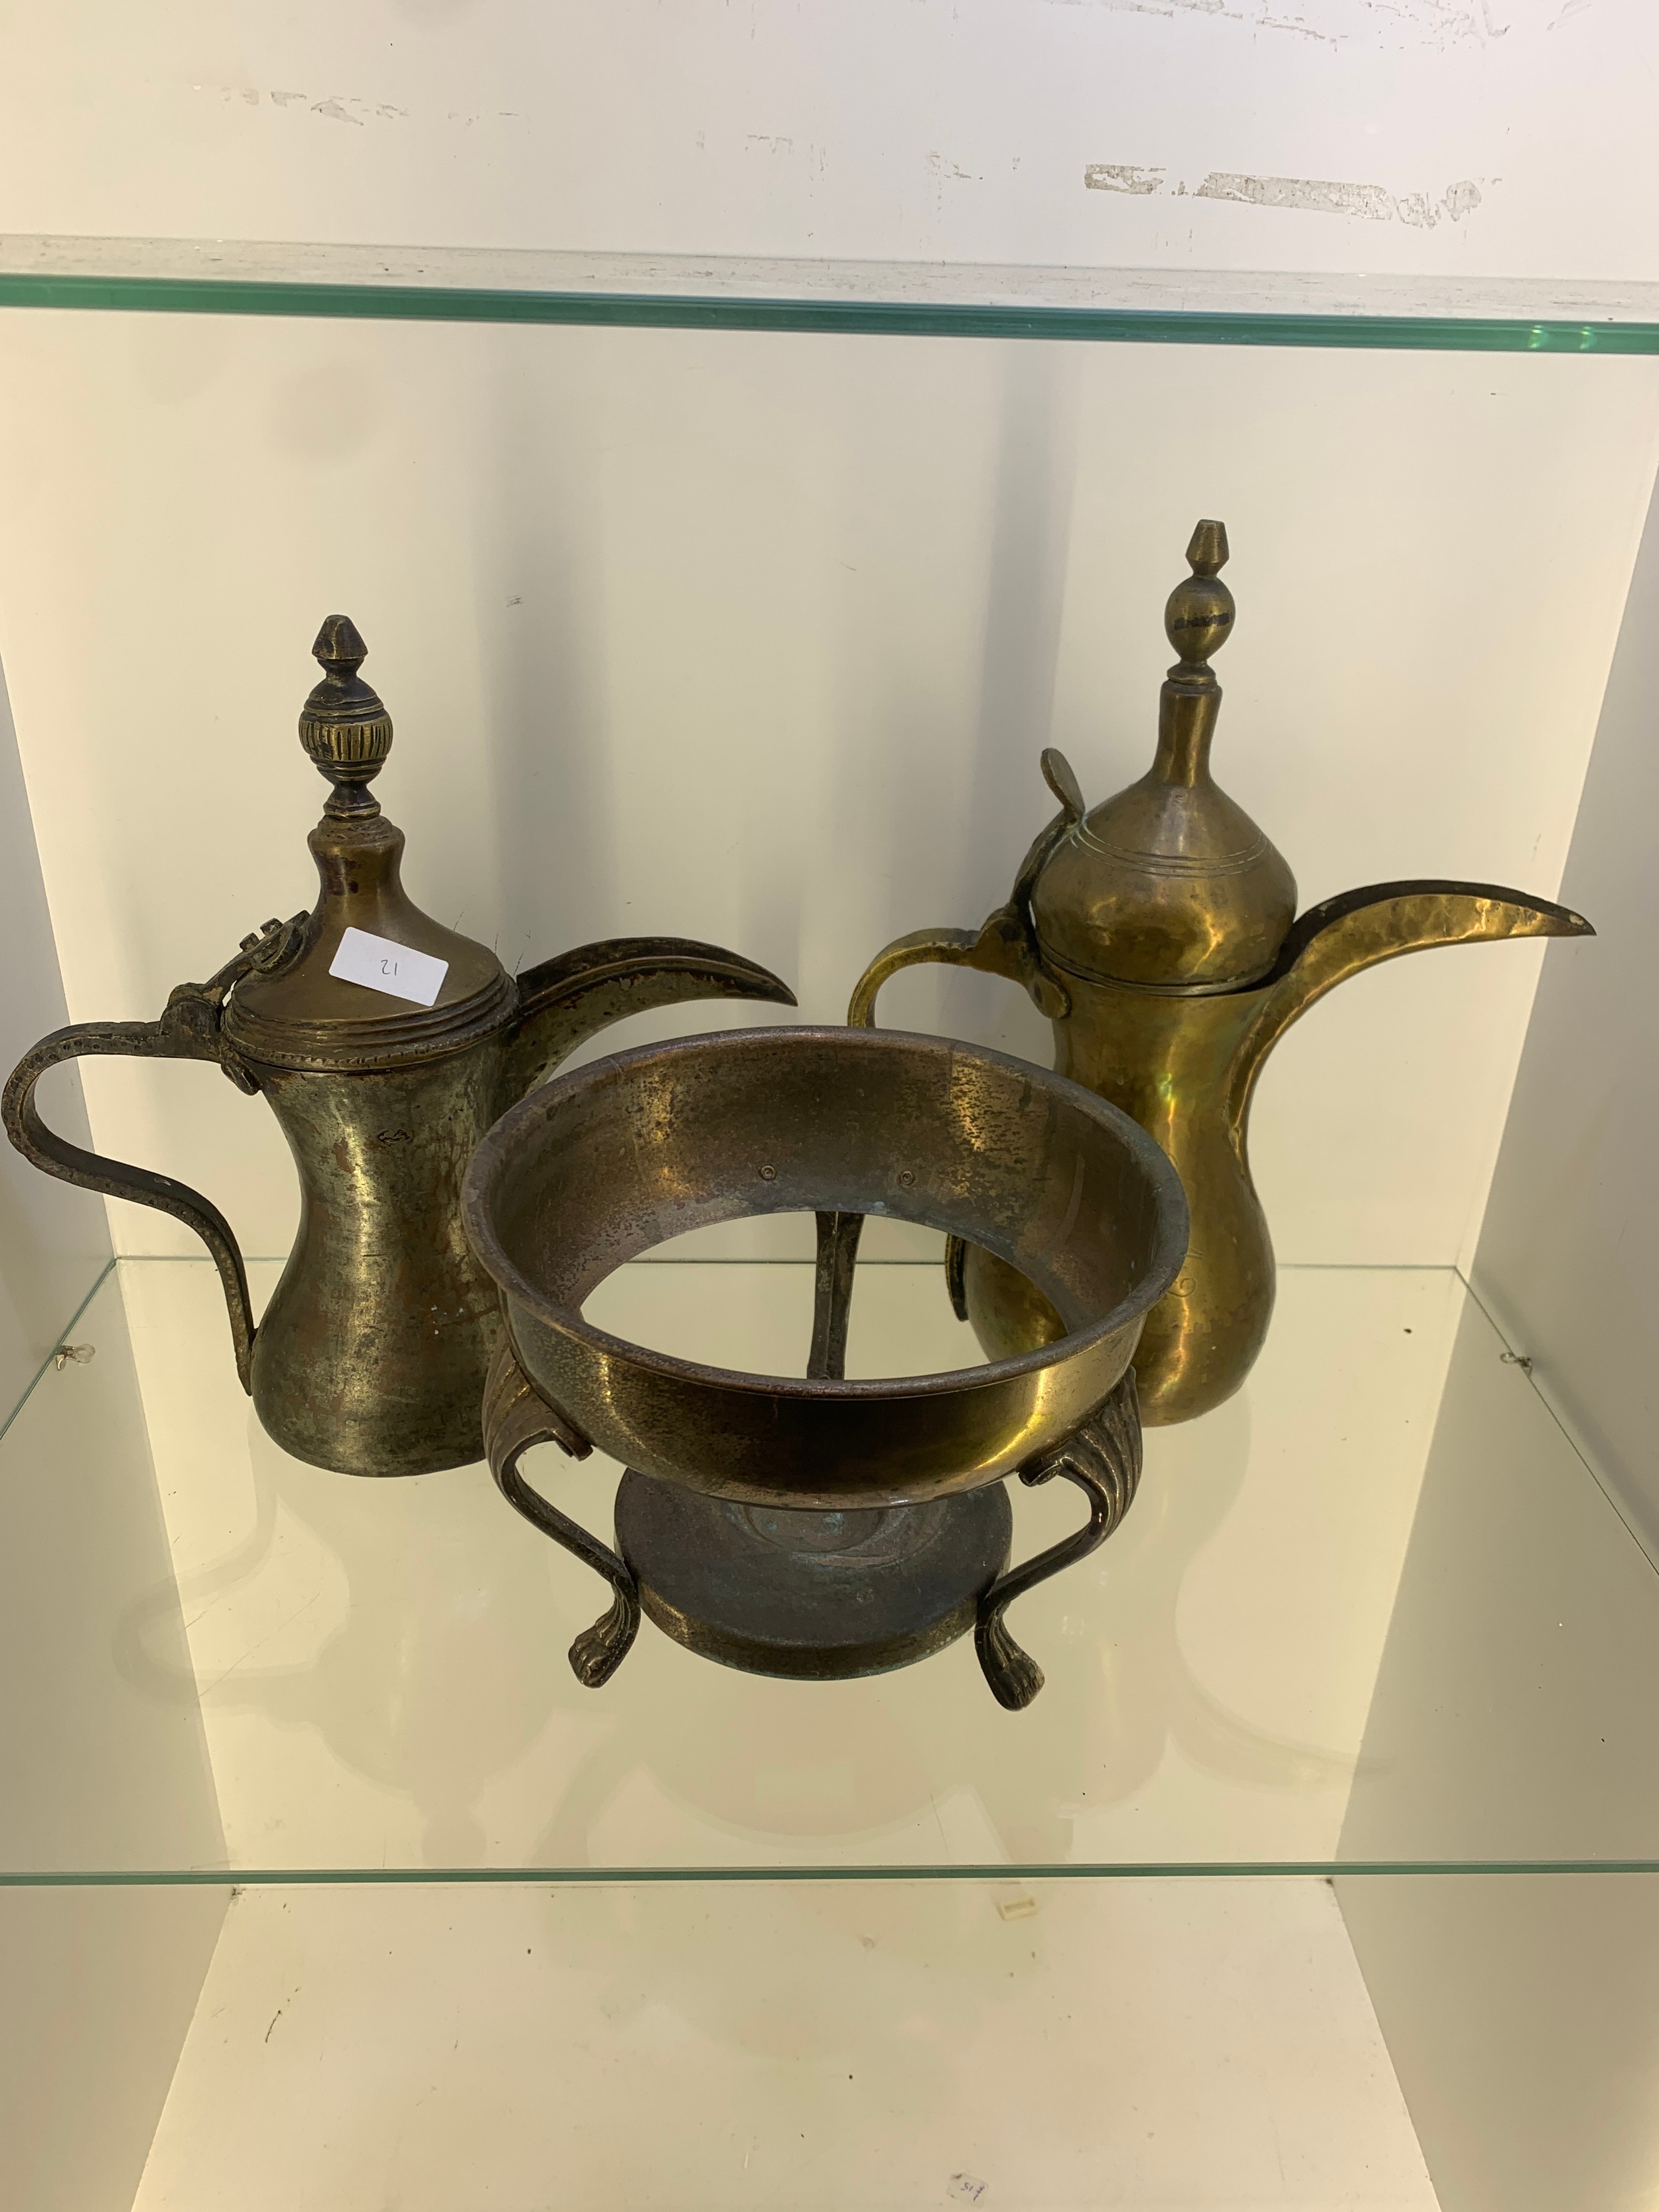 2 antique brass coffee pots saudi arbia and middle eastand a silver champange bucket holder